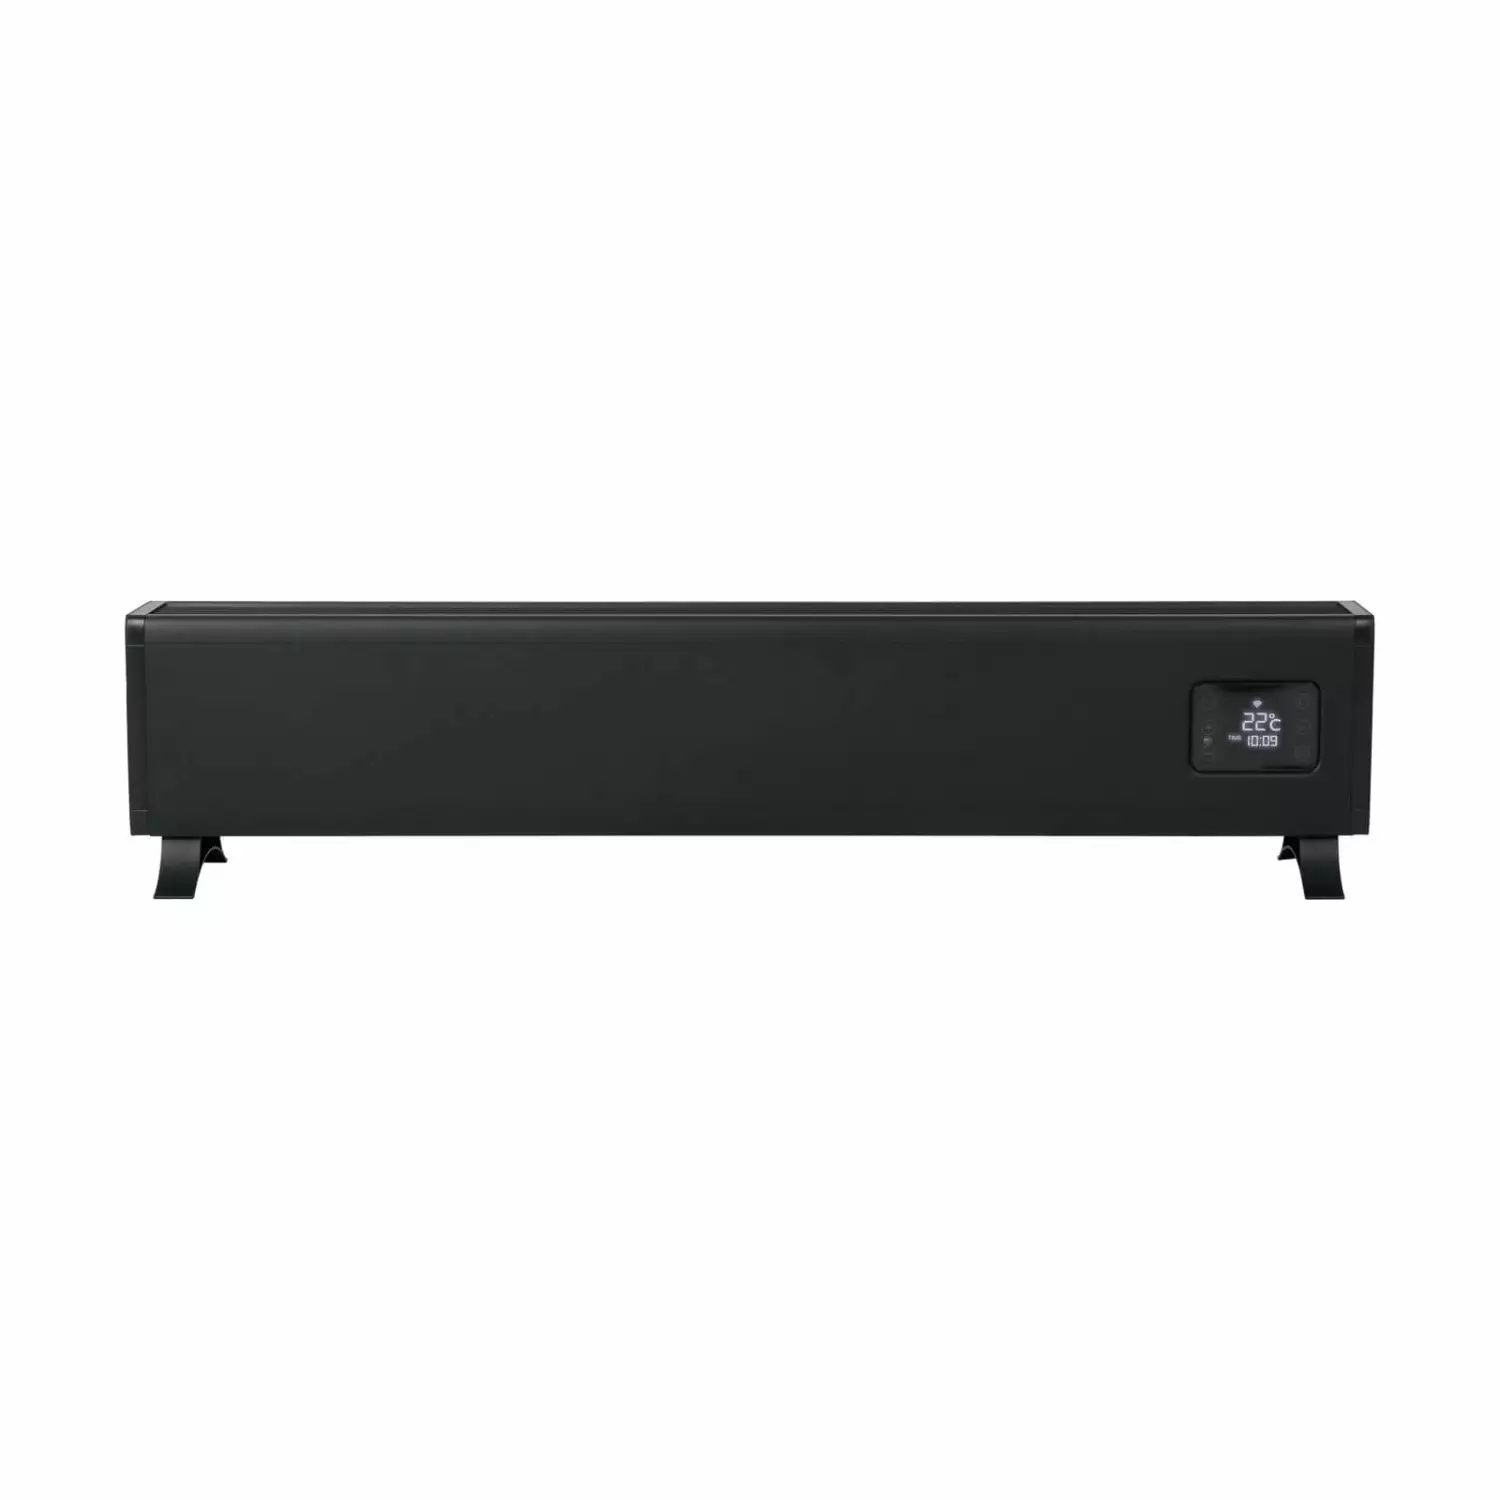 Eurom Alutherm Baseboard 1500 Wi-Fi Black Convectorkachel - 1500W - 60m3-image